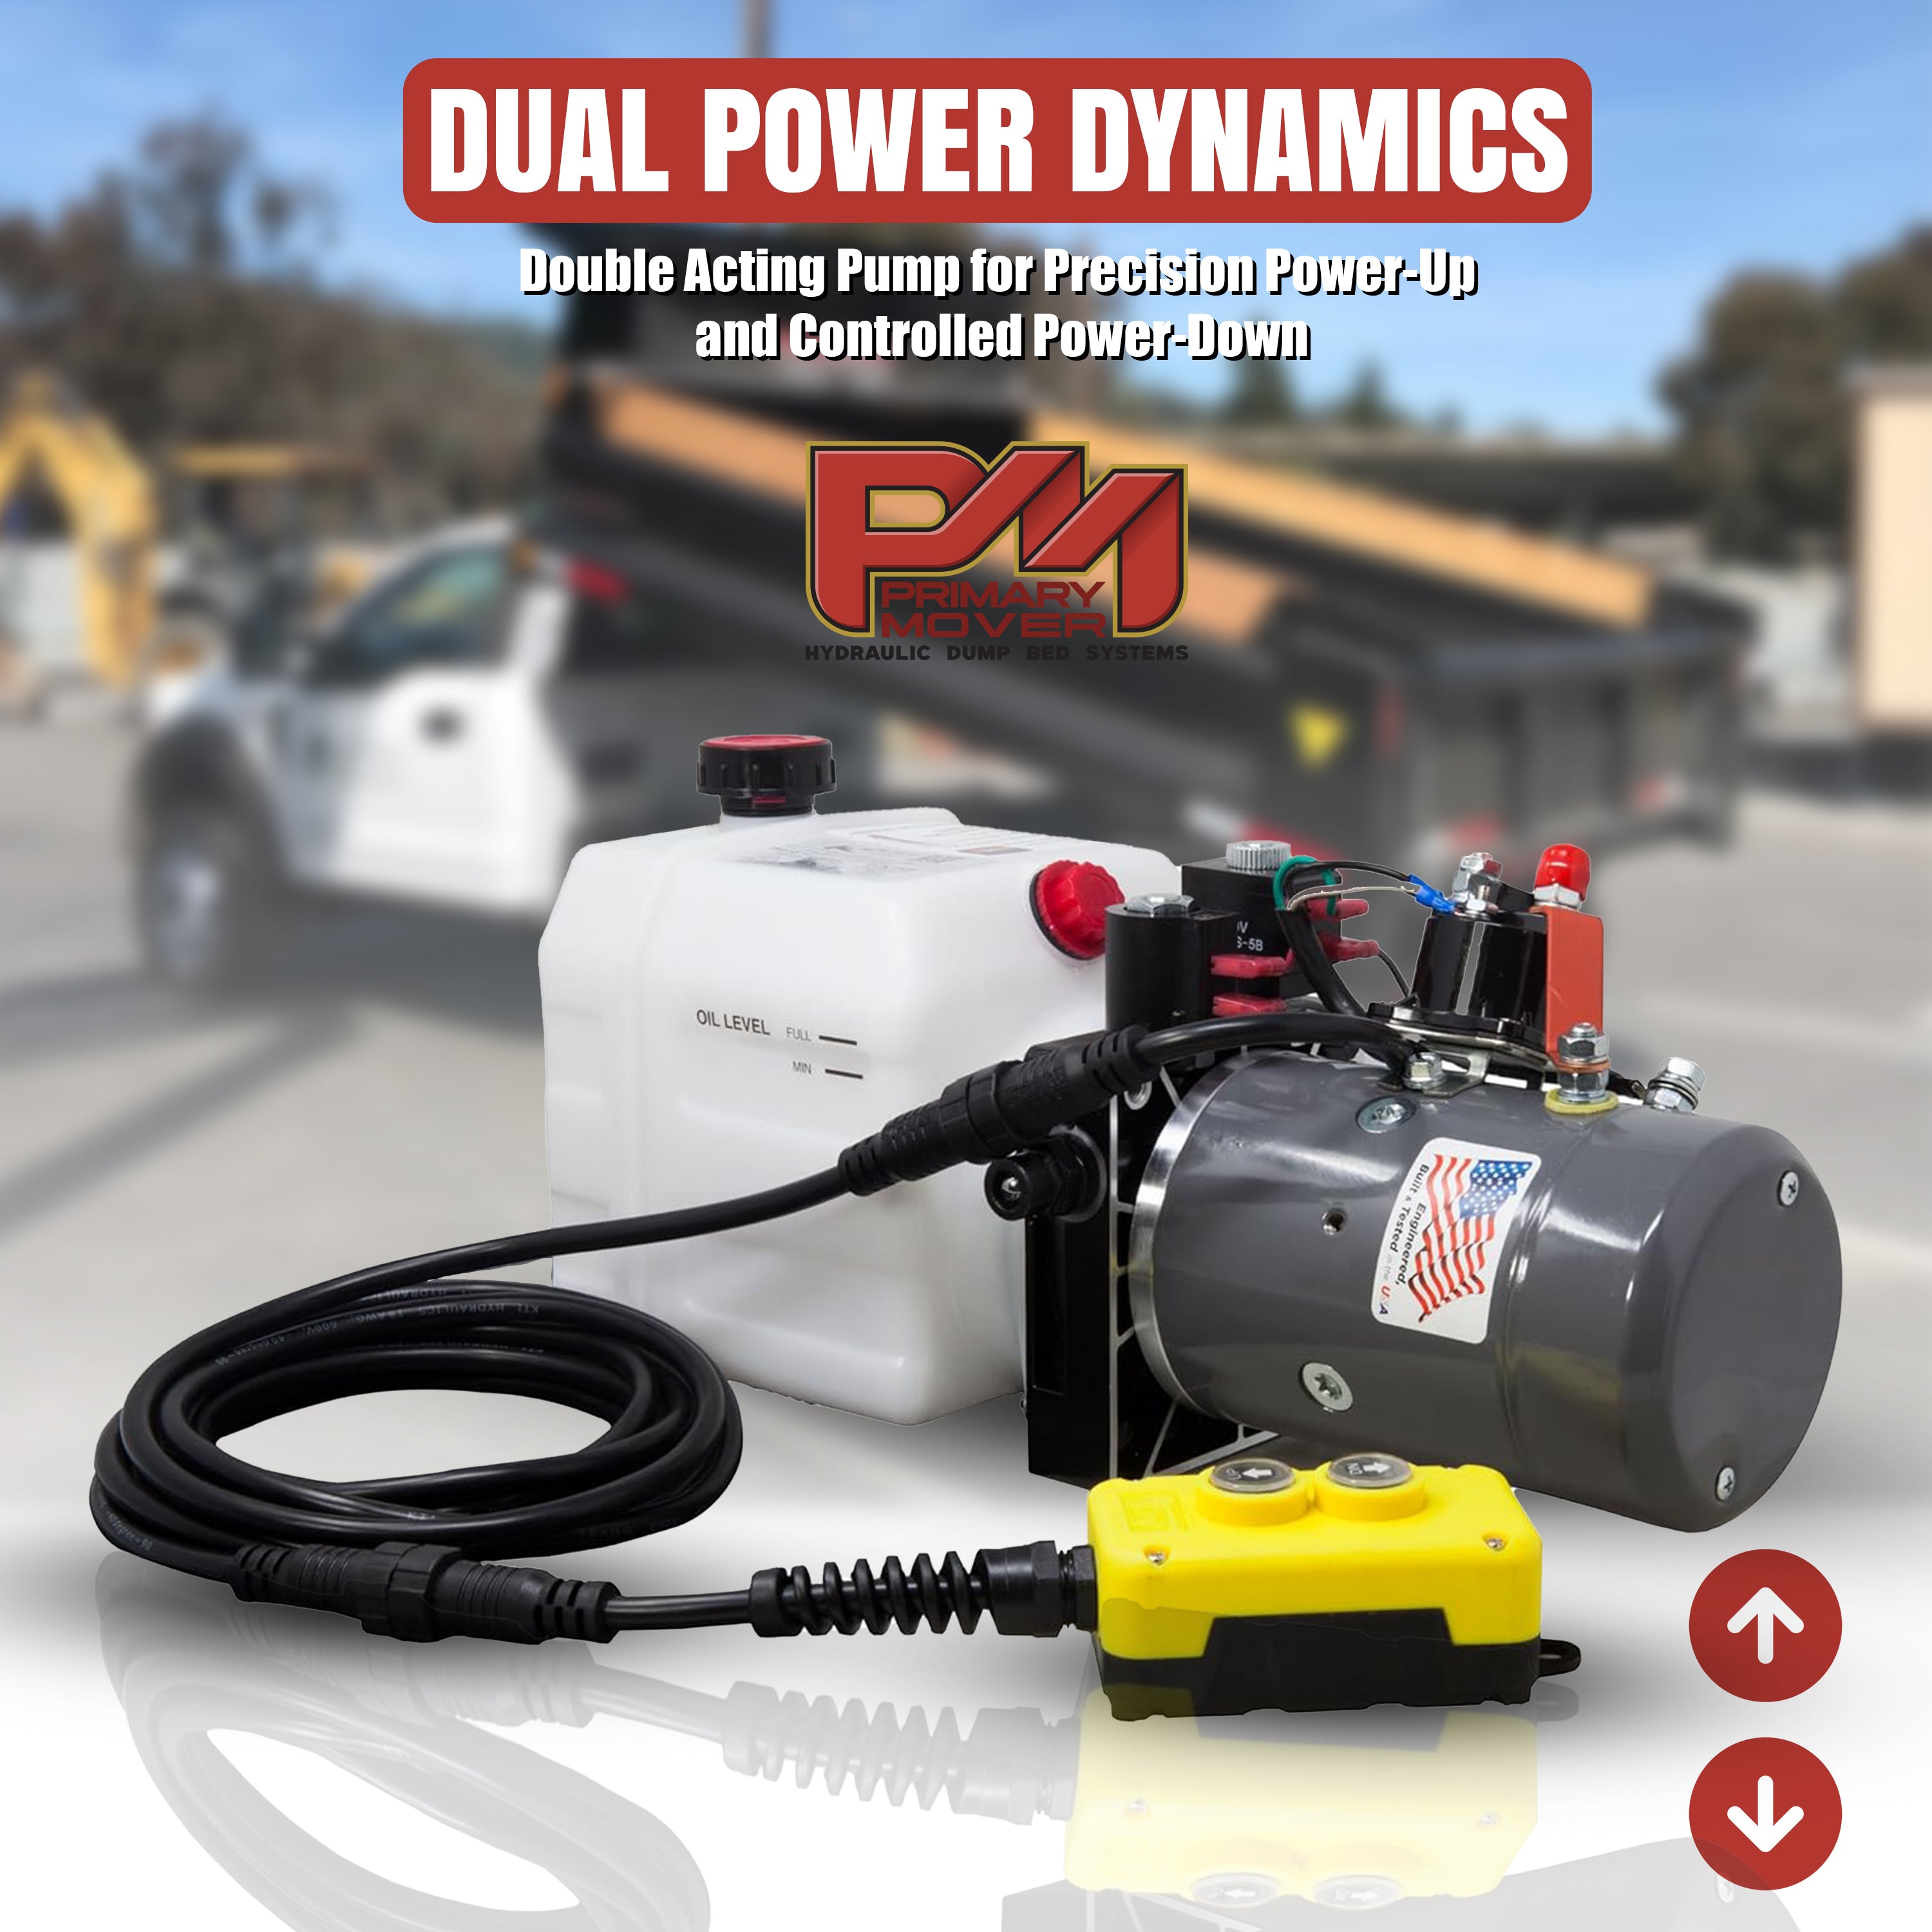 A high-performance 12k Single Hydraulic Trailer Jack Leg Kit with robust lifting capability, powerful hydraulic system, dual holding valve for stability, and zinc-plated components for durability.